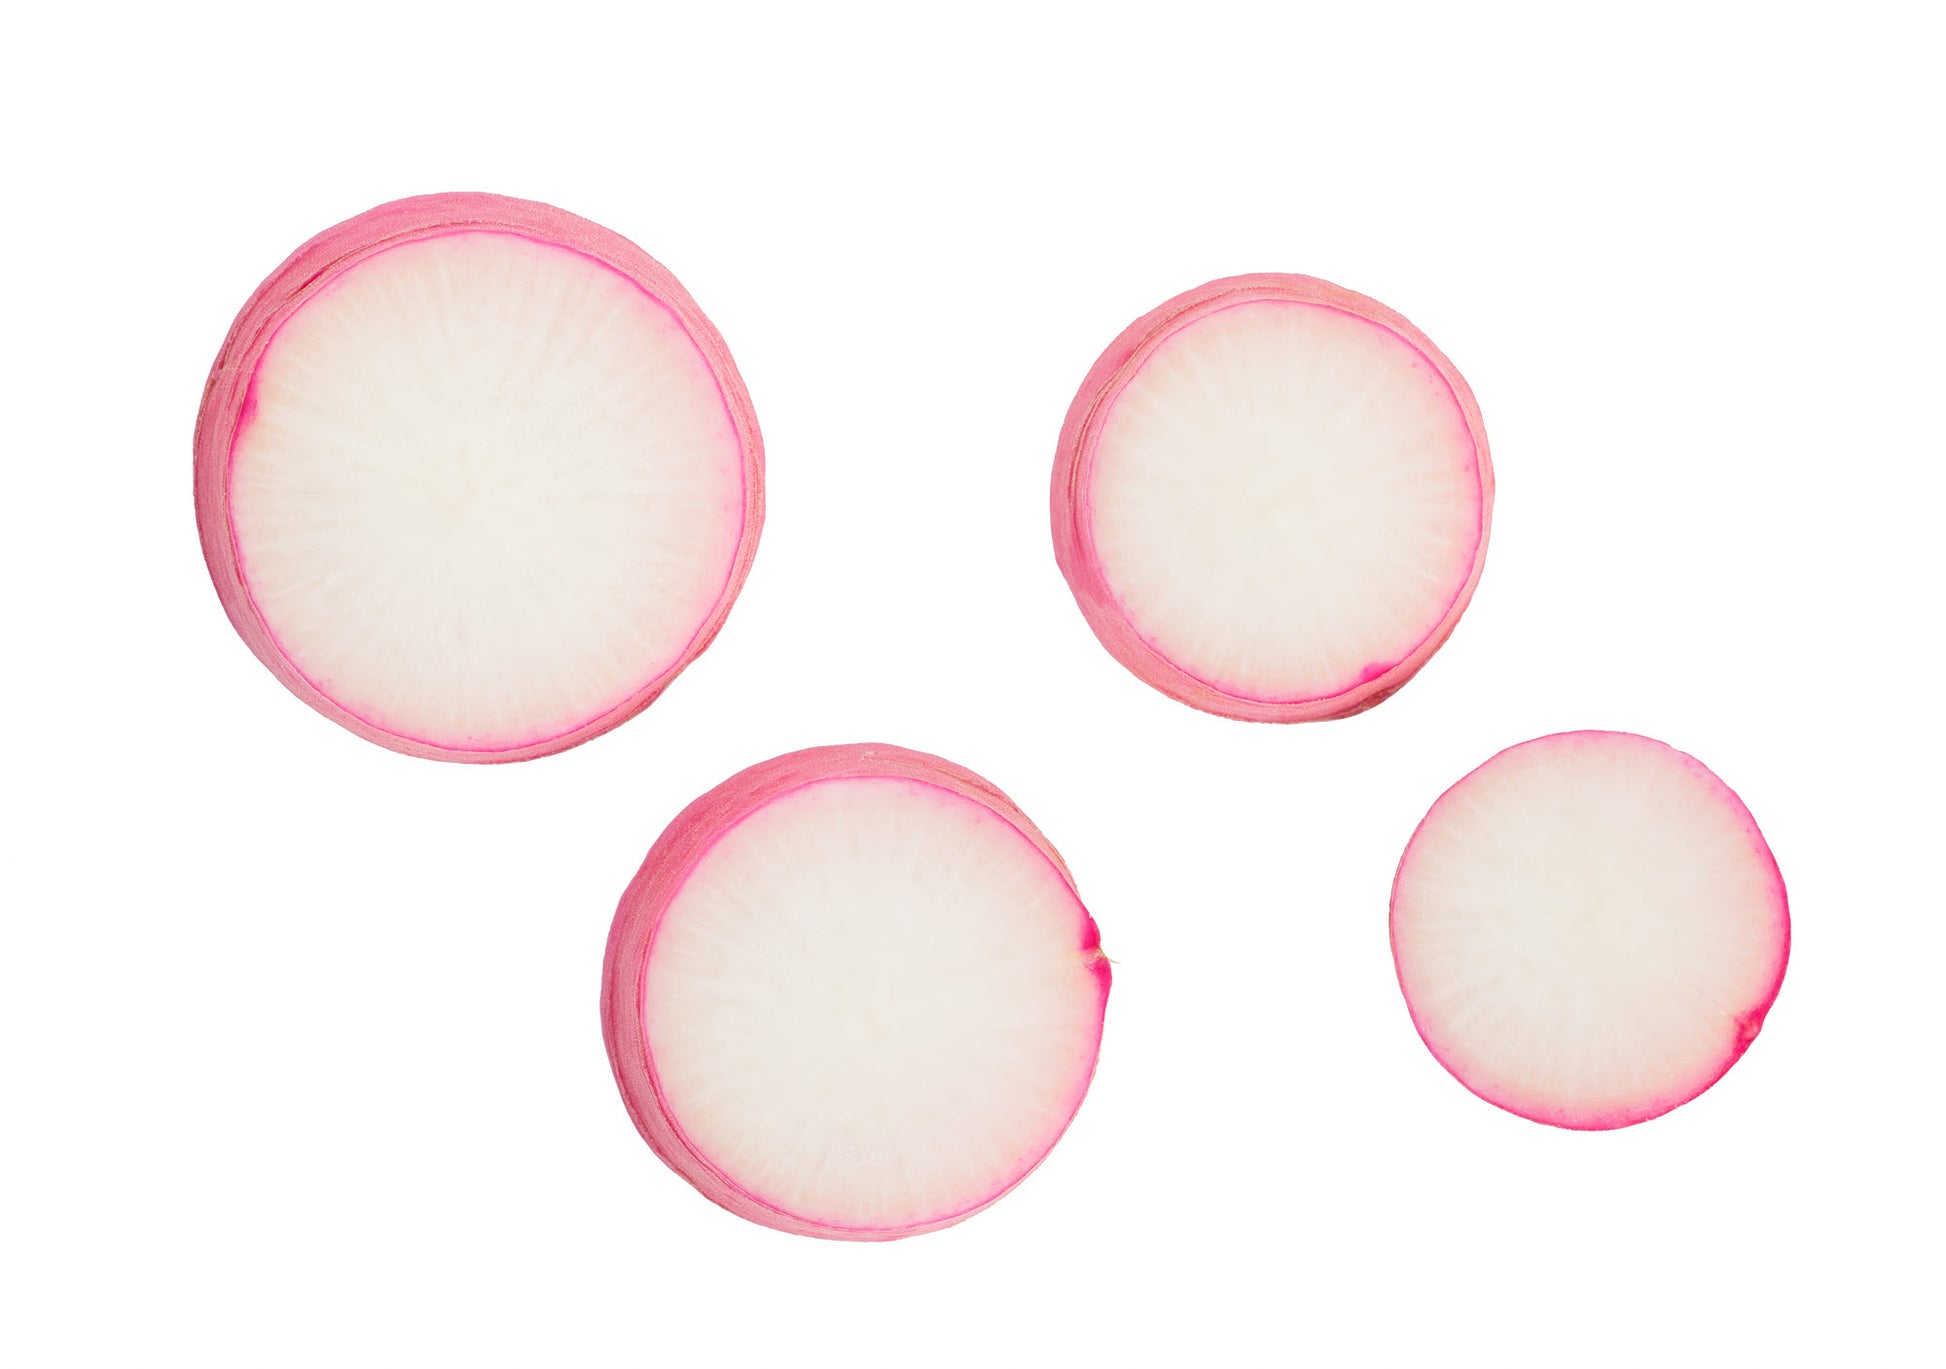 On display are 4 radish slices, of the variety Champion. The radish slices vary in width, with each slice clearly displaying its crisp, juicy interior.  All slices are ringed in the familiar magenta color. The radish slices appear against a pure white background.